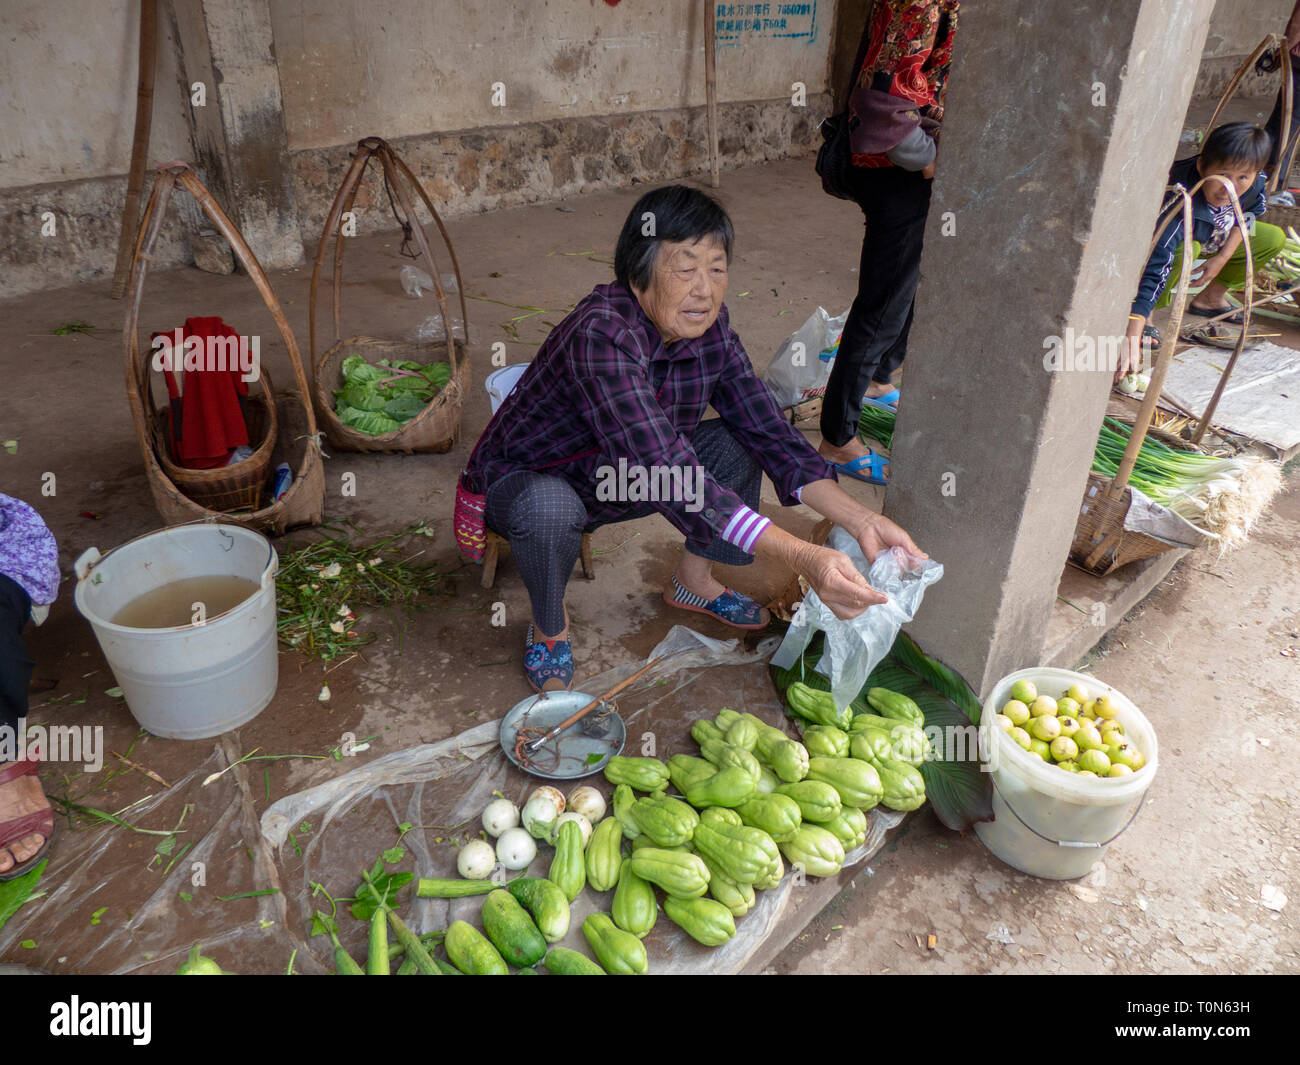 Vendor sells a small selection of fruit and vegetables in the food market of Jianshui, Honghe prefecture, Yunnan province, China. Stock Photo